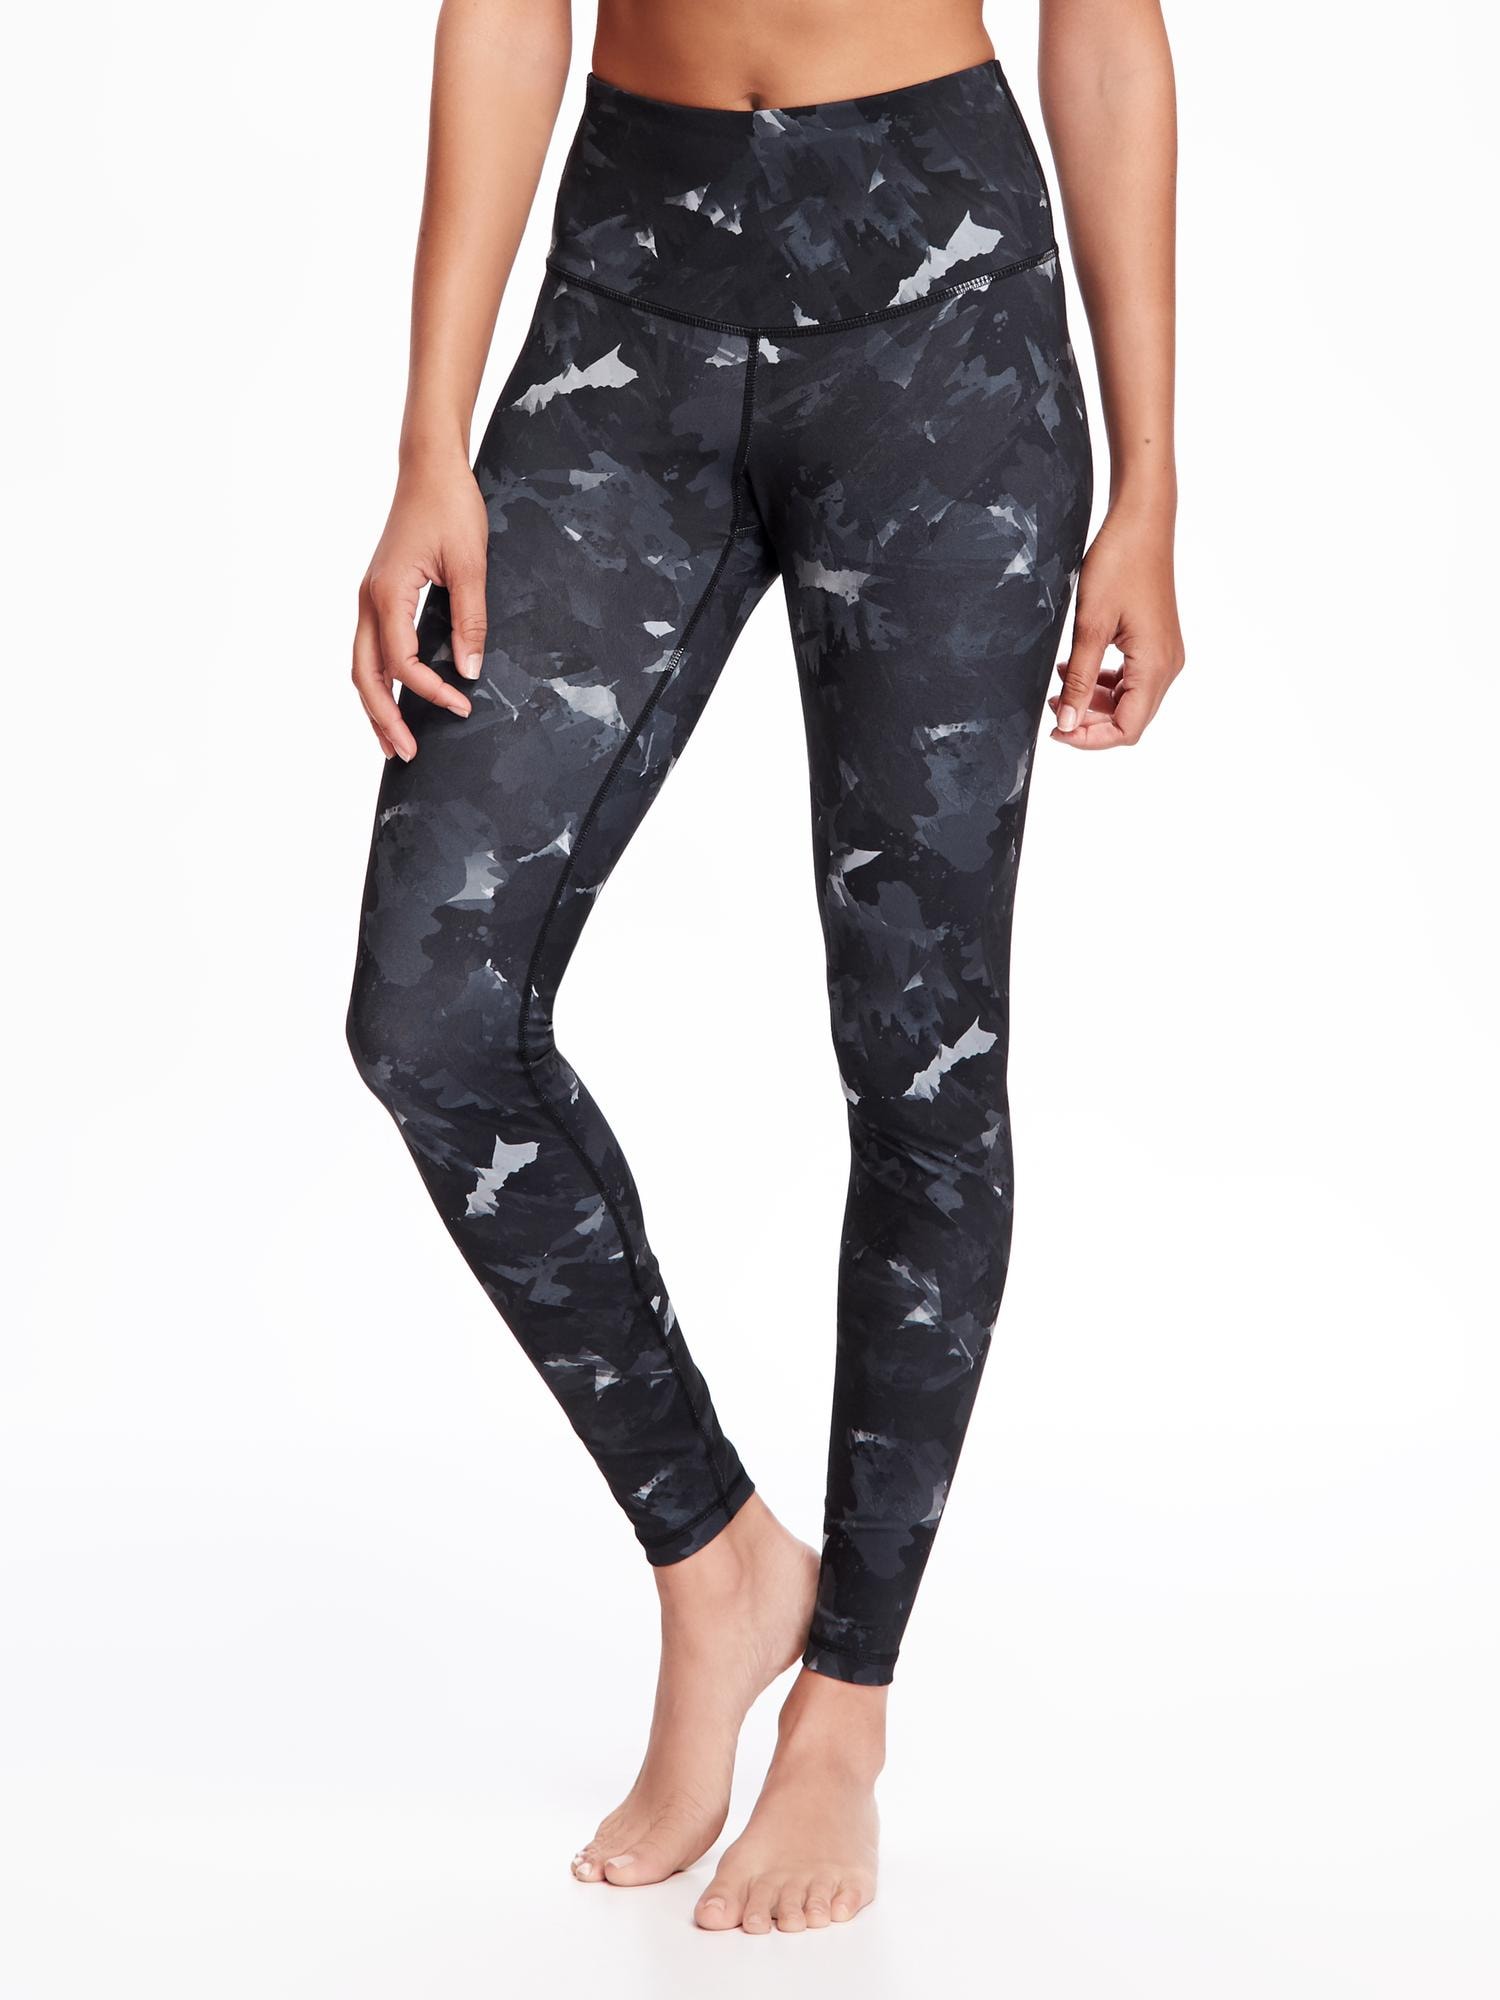 High-Rise Printed Compression Leggings for Women